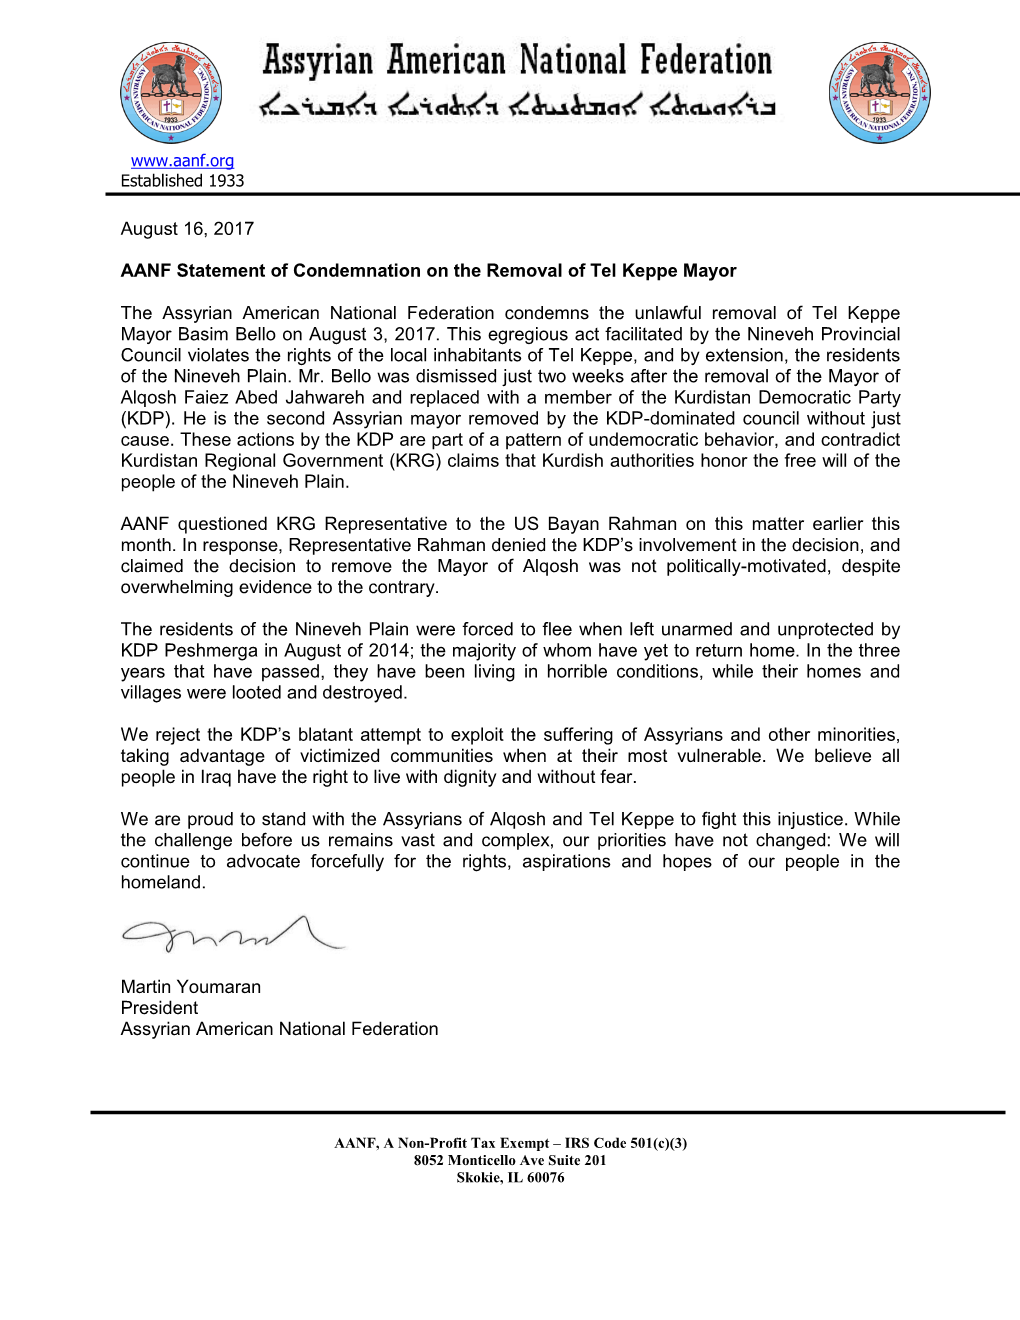 August 16, 2017 AANF Statement of Condemnation on the Removal of Tel Keppe Mayor the Assyrian American National Federation Conde